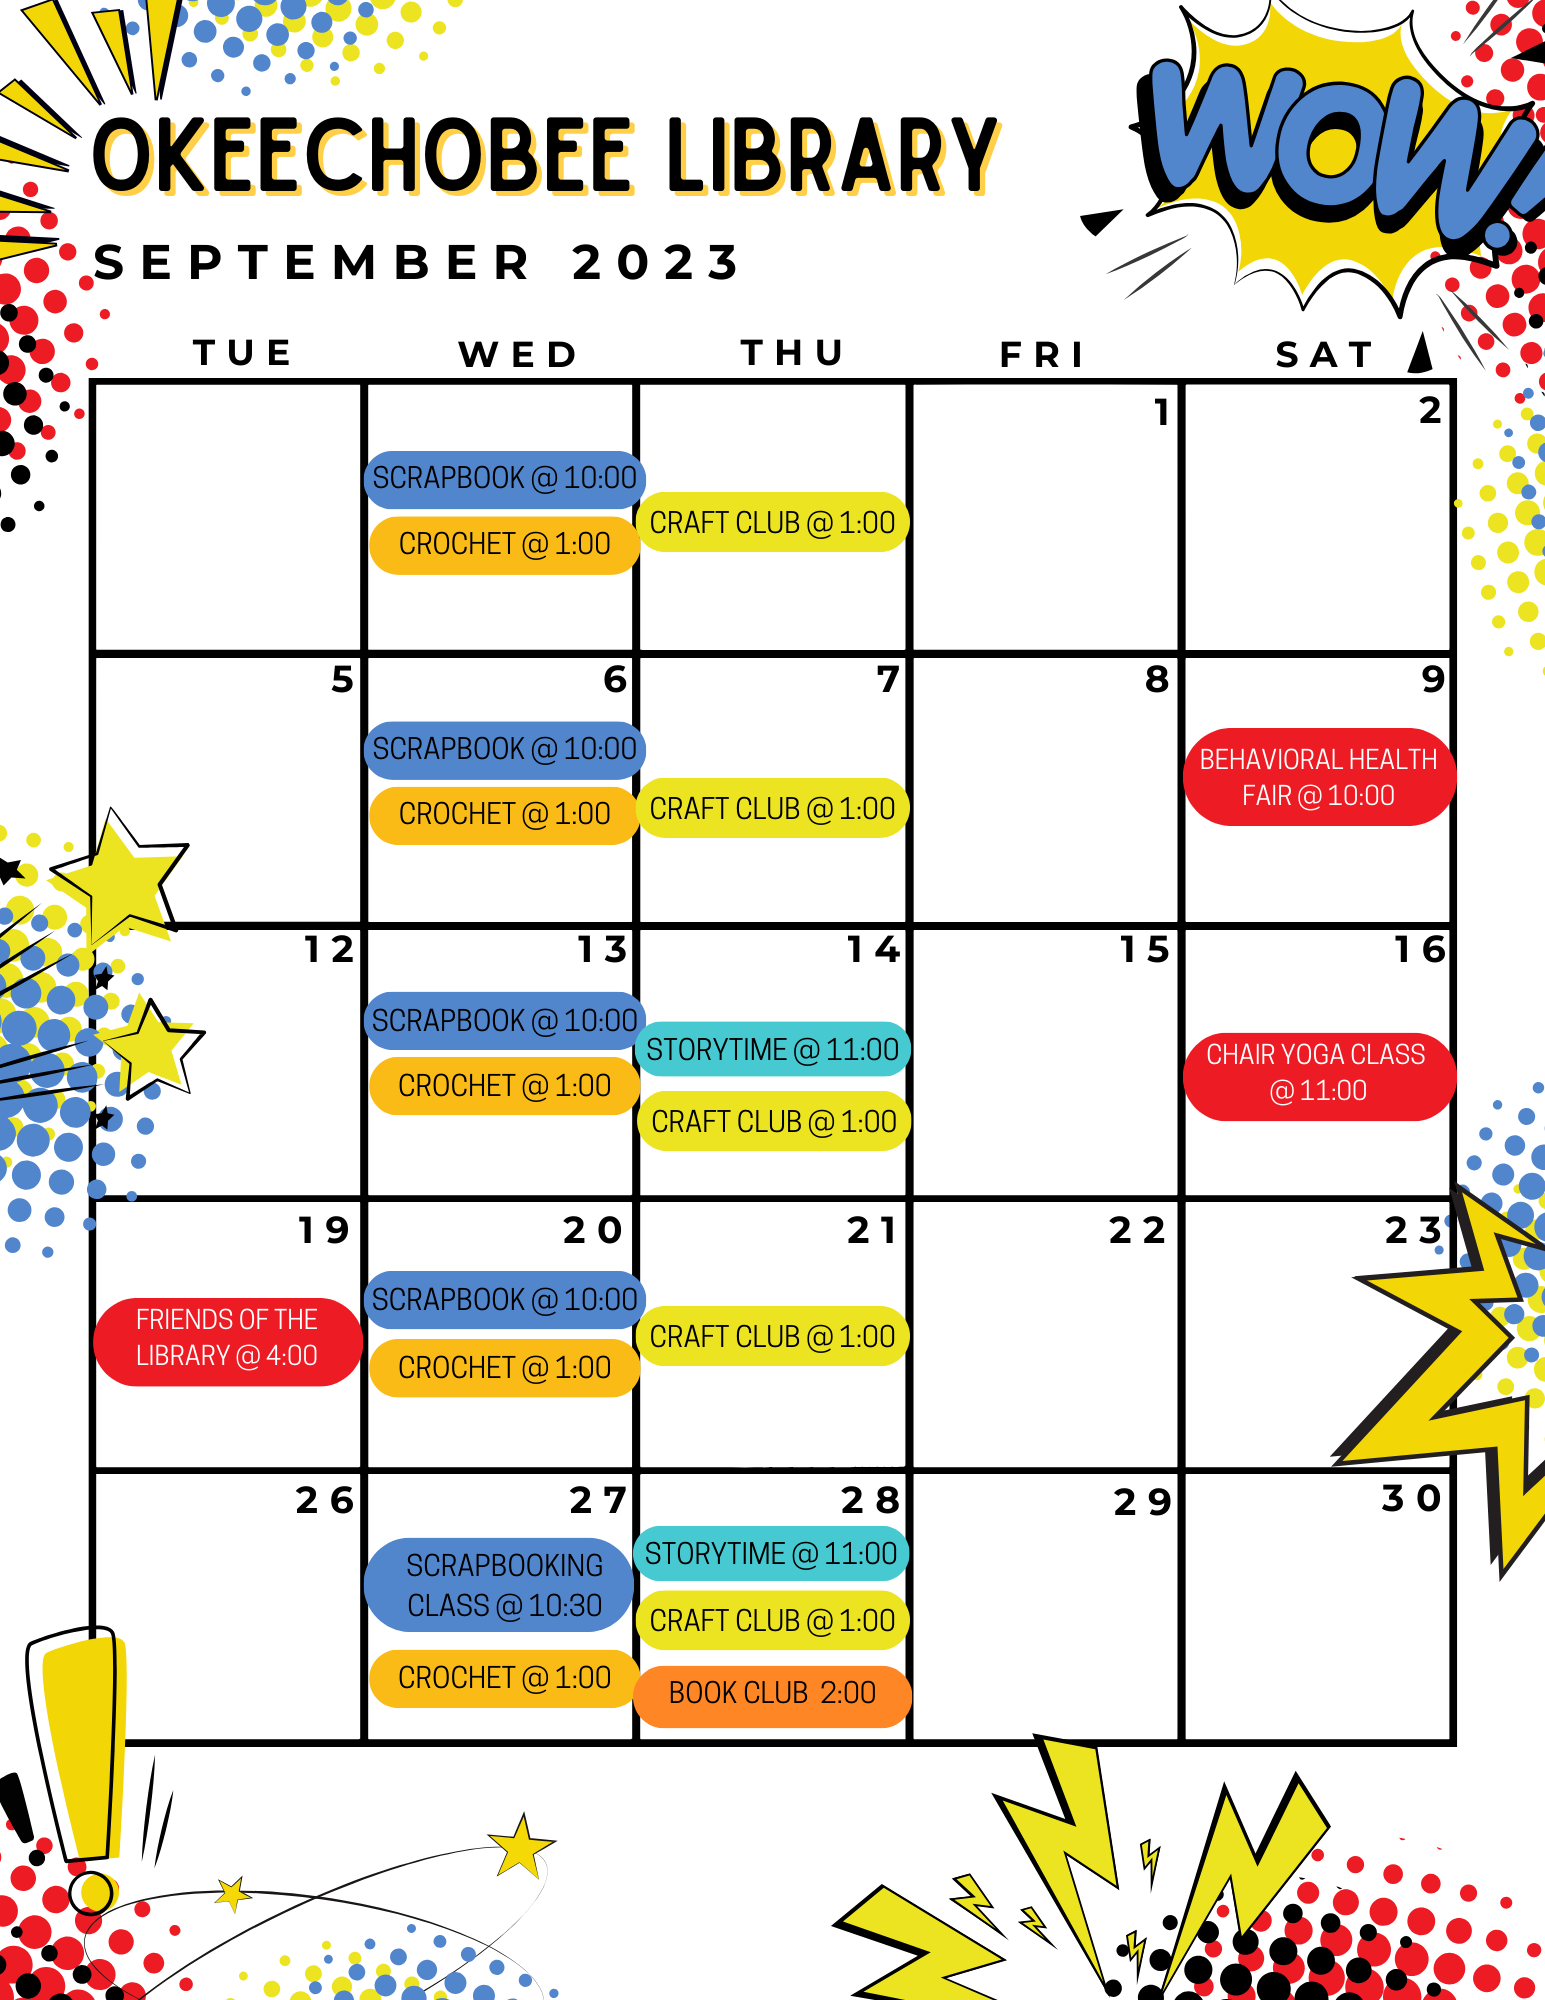 Check out the Okeechobee County Library's calendar of events for September! For more information check out our September Newsletter or call us at 863-763-3536!